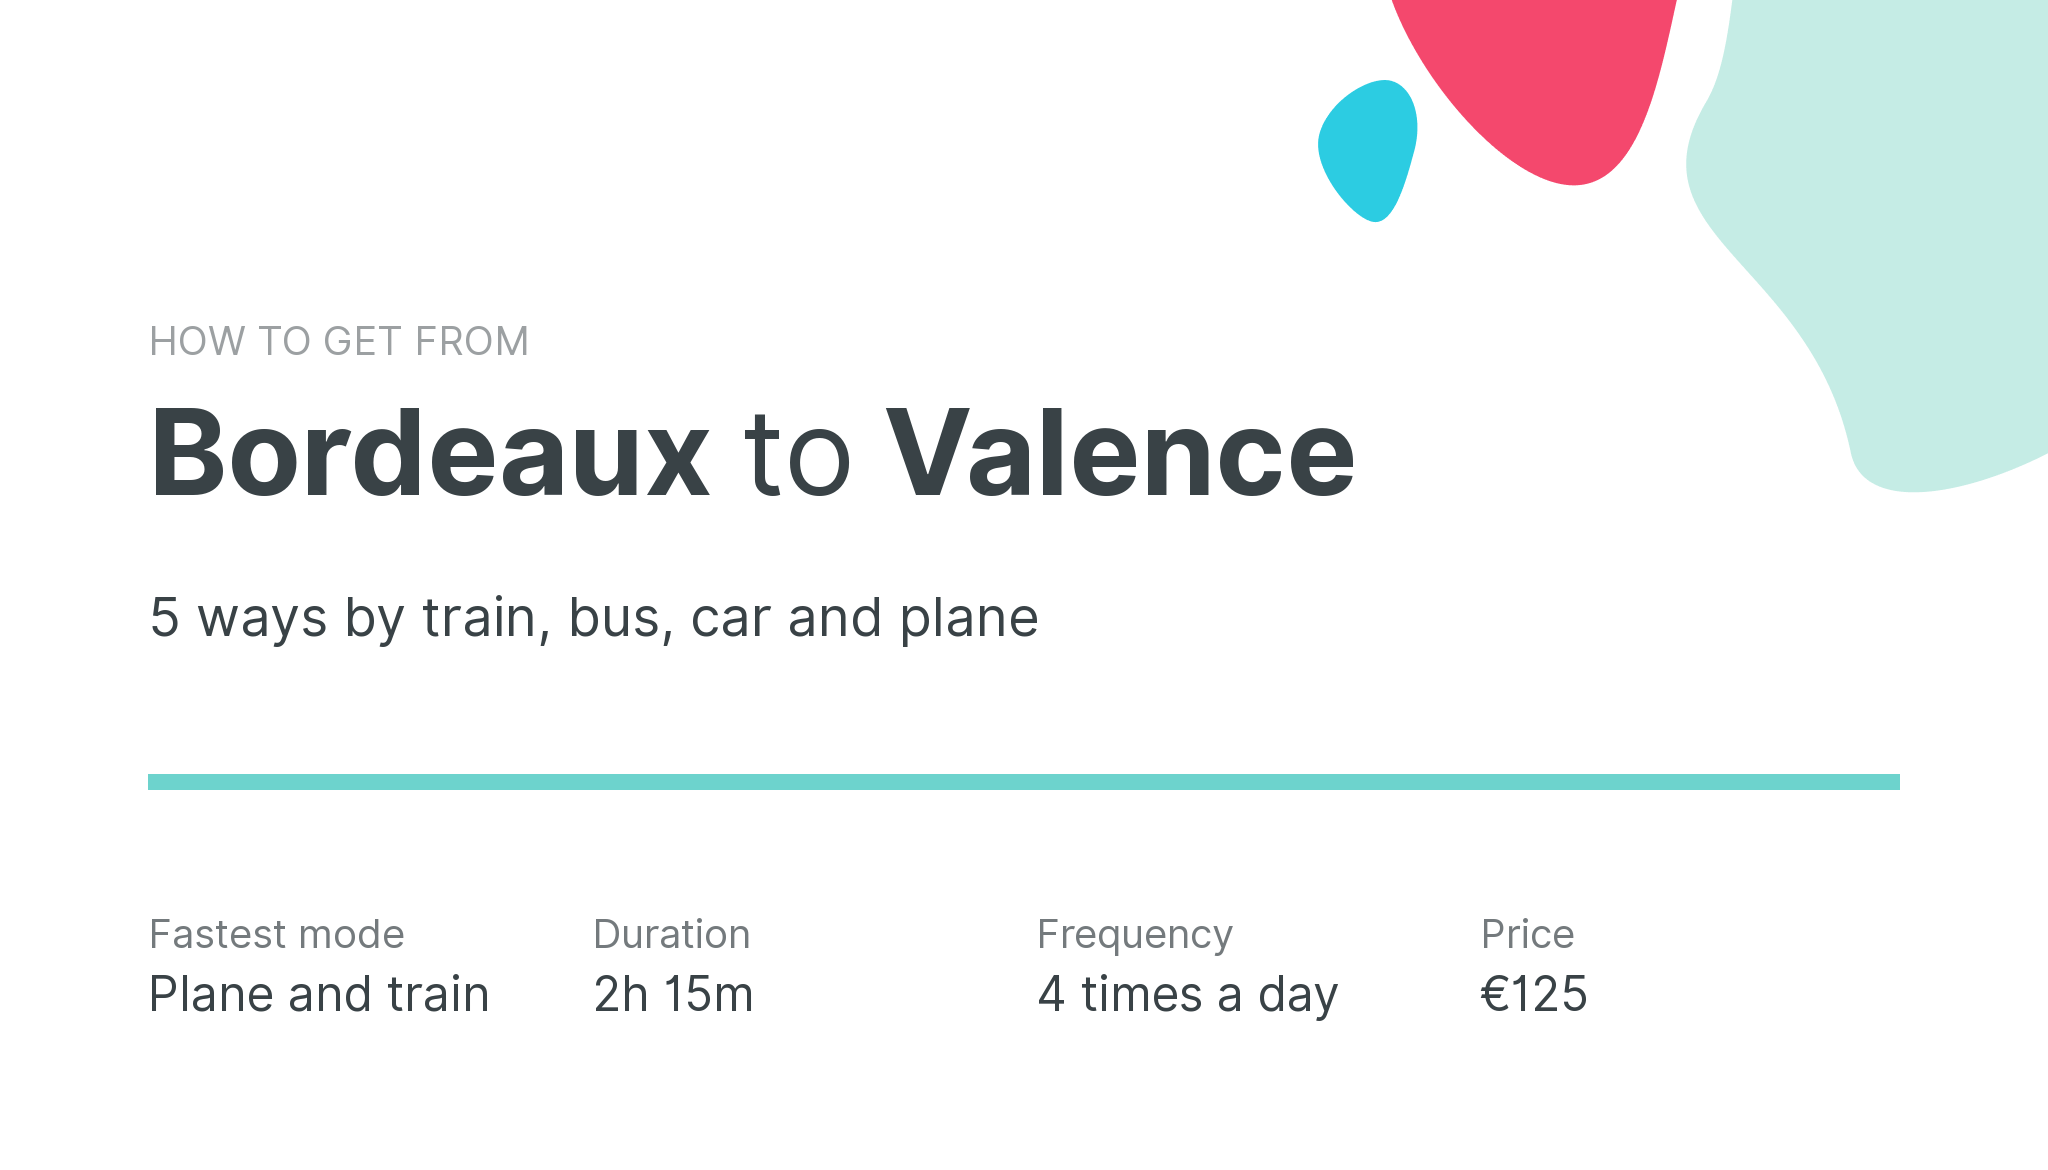 How do I get from Bordeaux to Valence